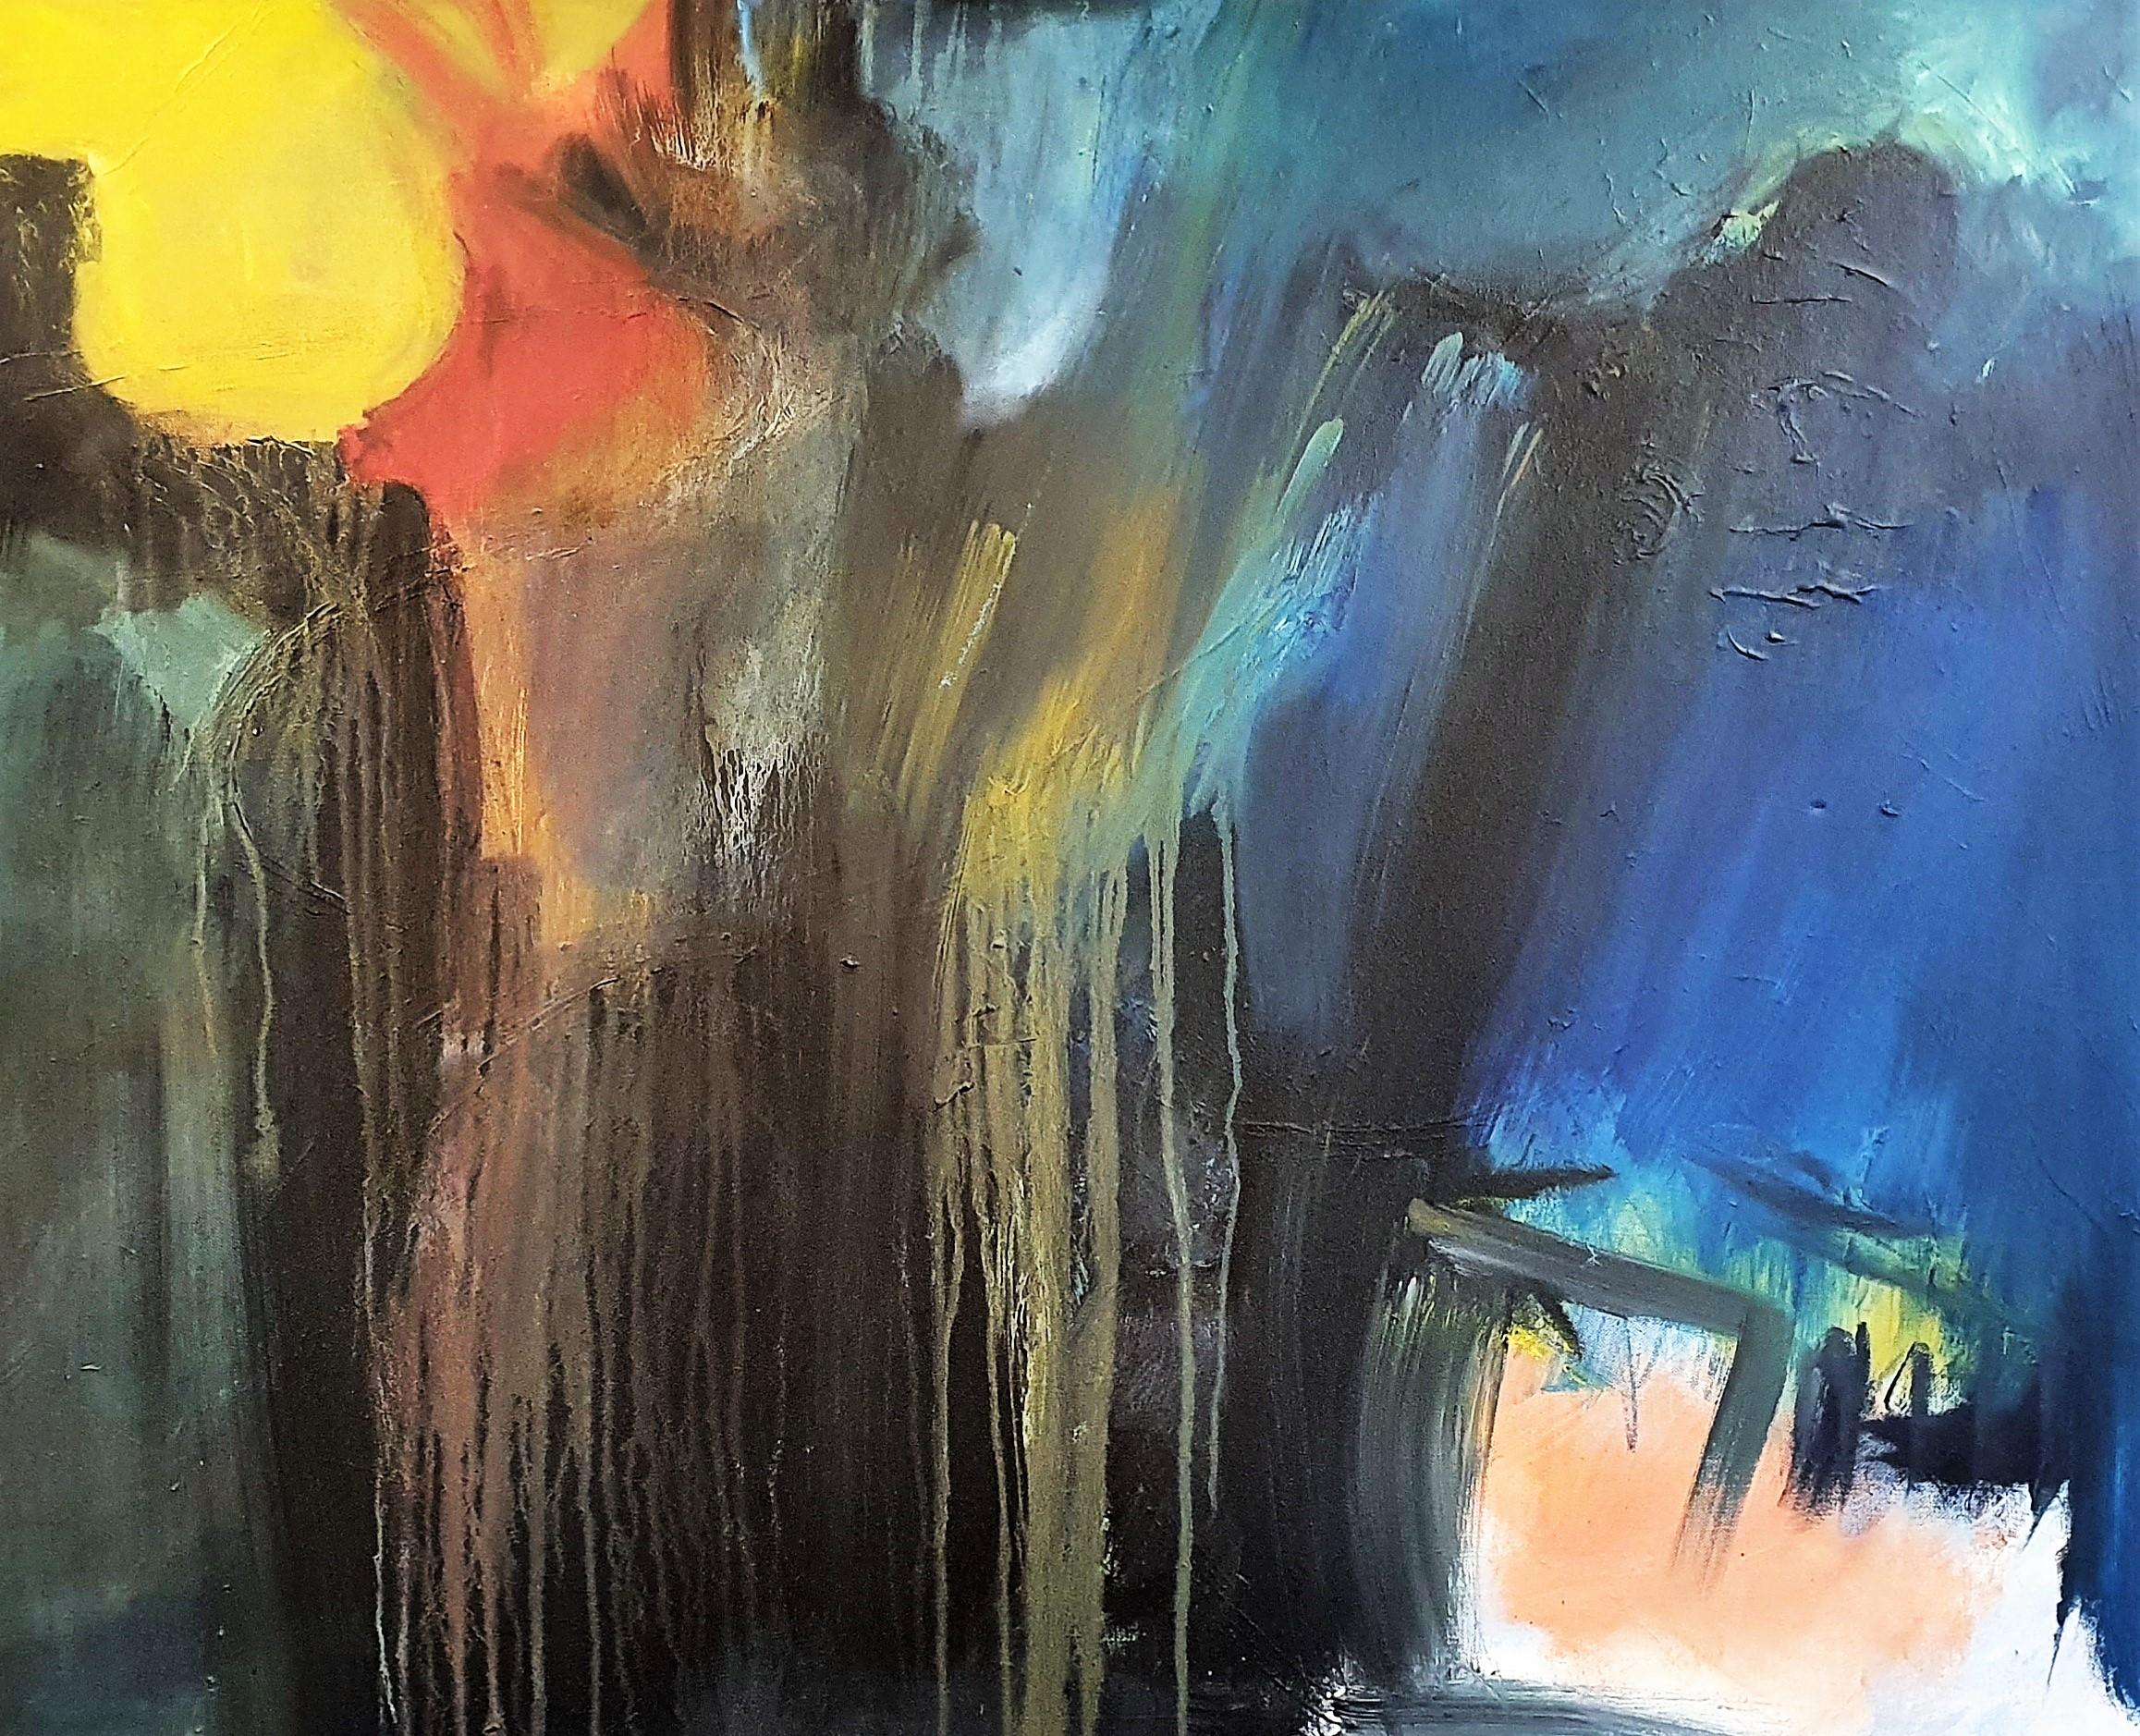 Kate Bell Abstract Painting - "Falling Through Darkness". Contemporary Abstract Oil Painting